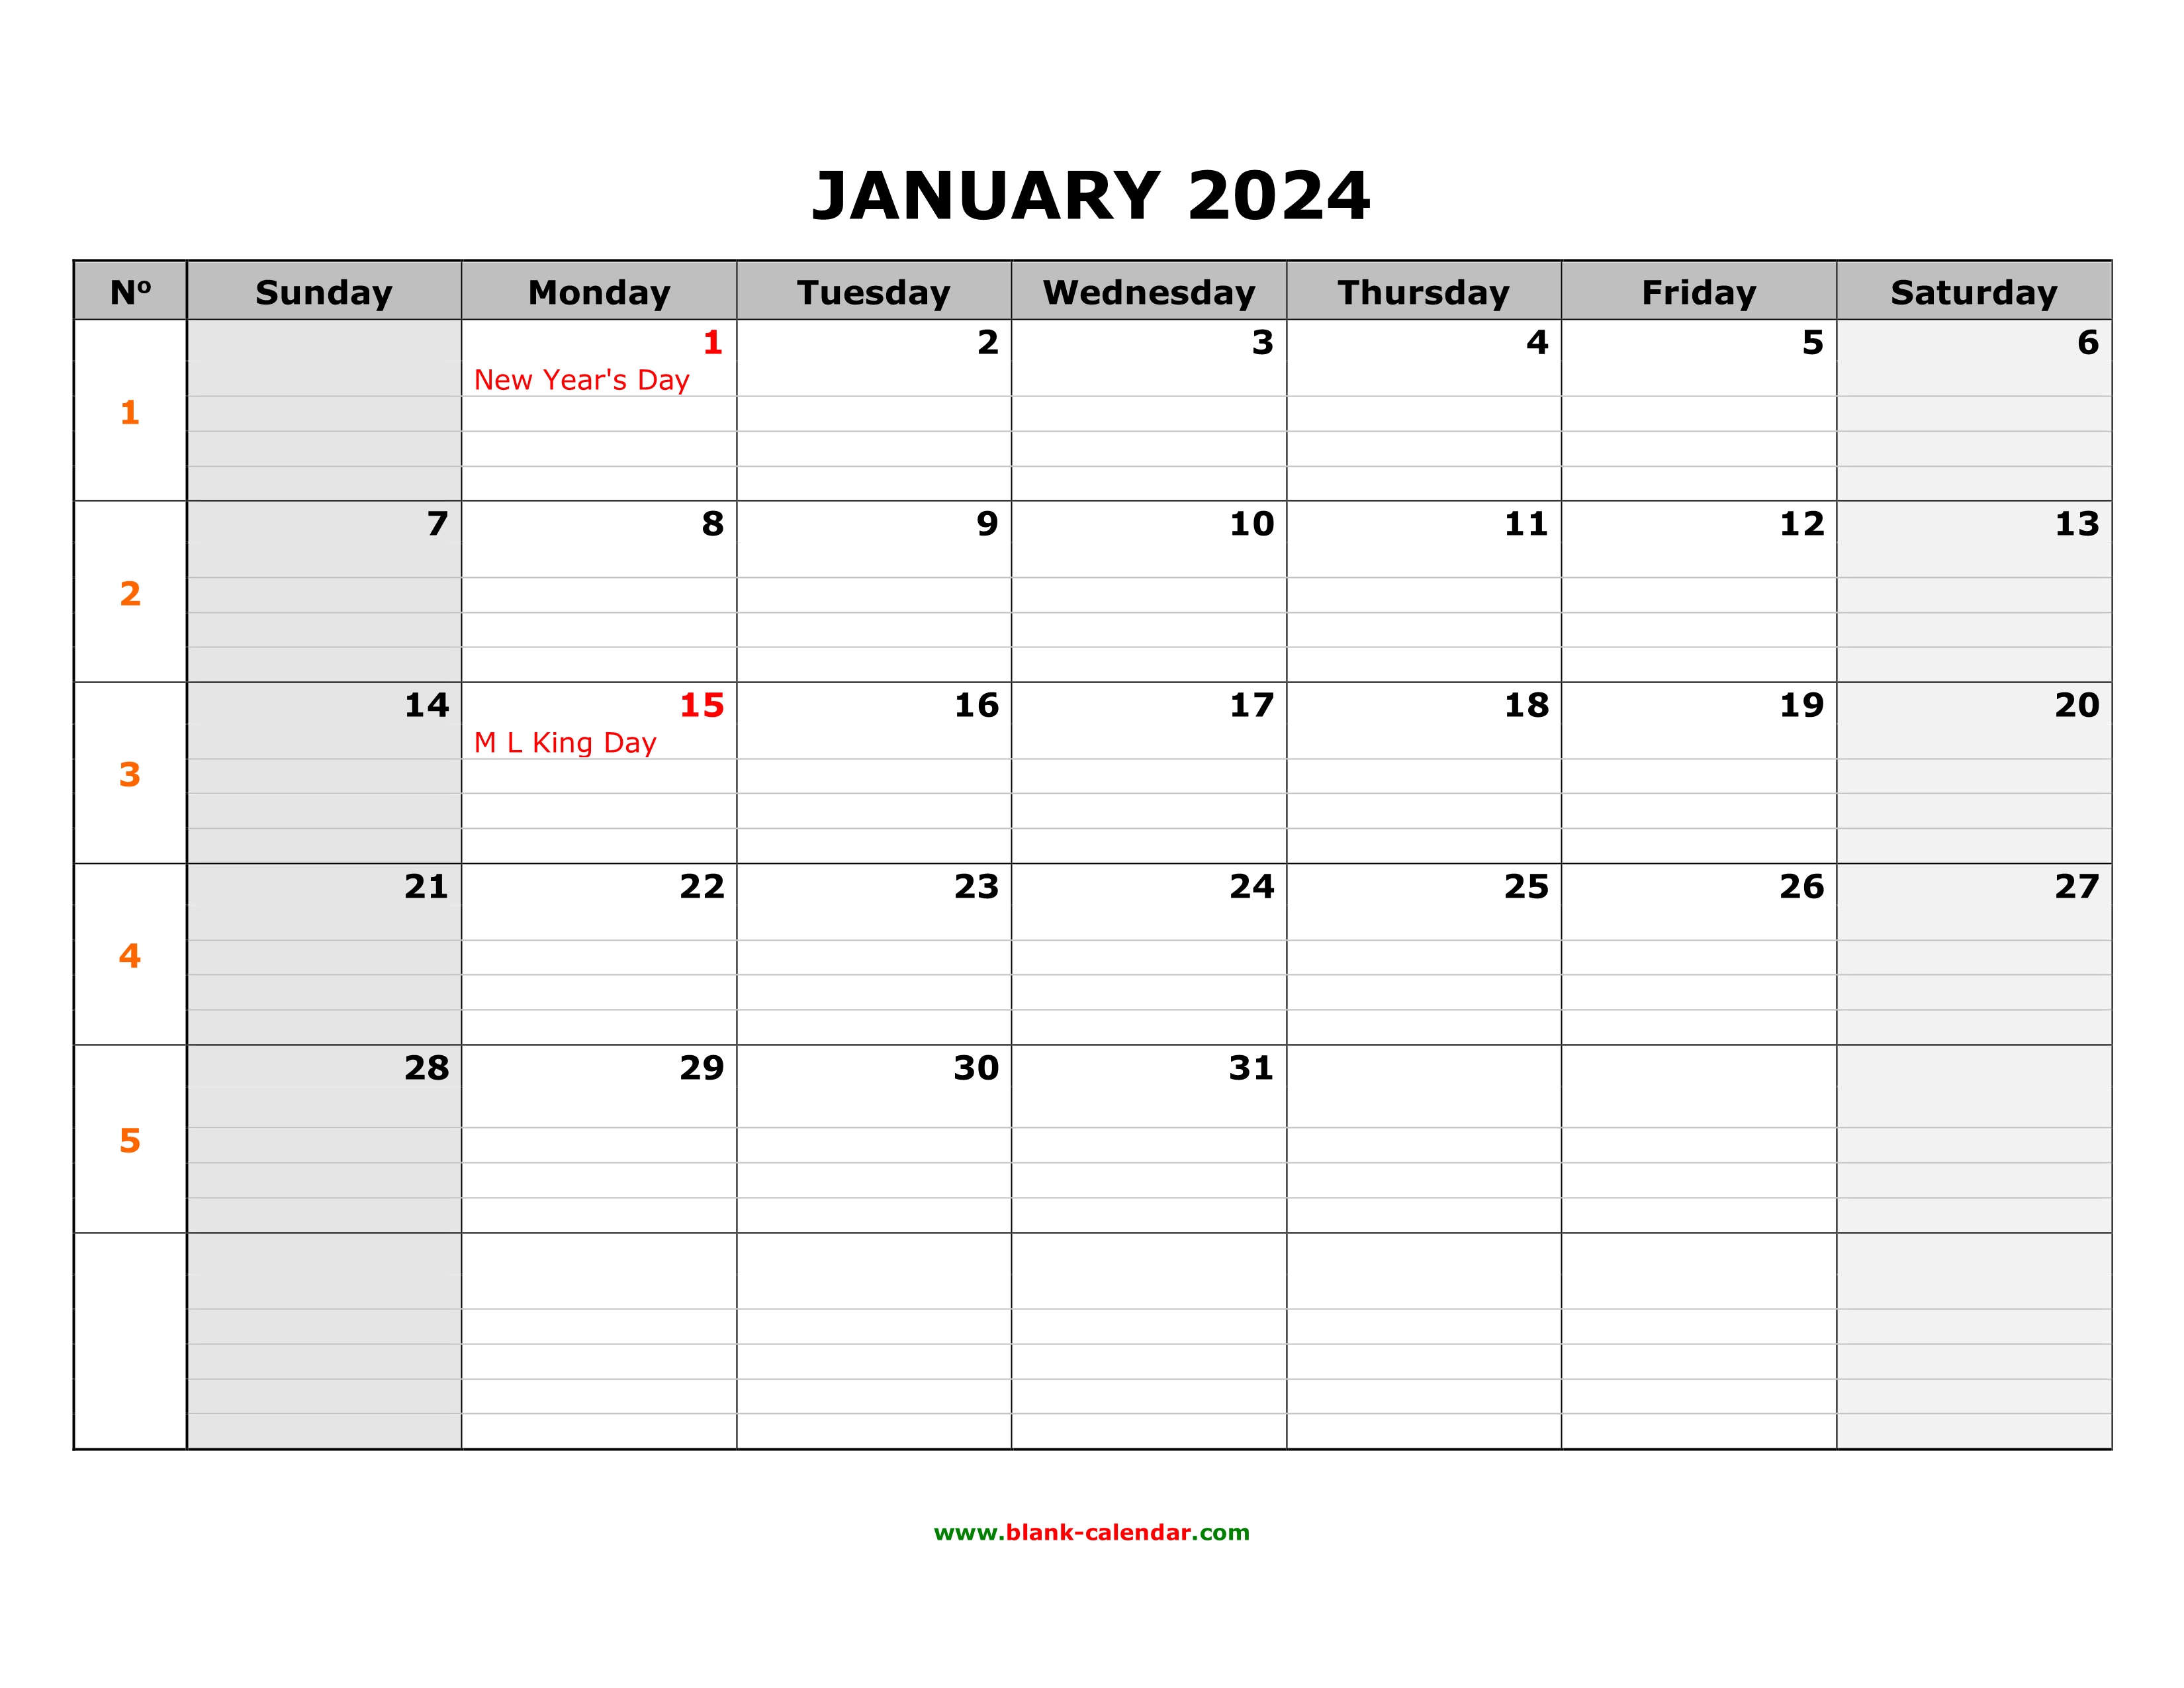 Free Download Printable Calendar 2024, large box grid, space for notes